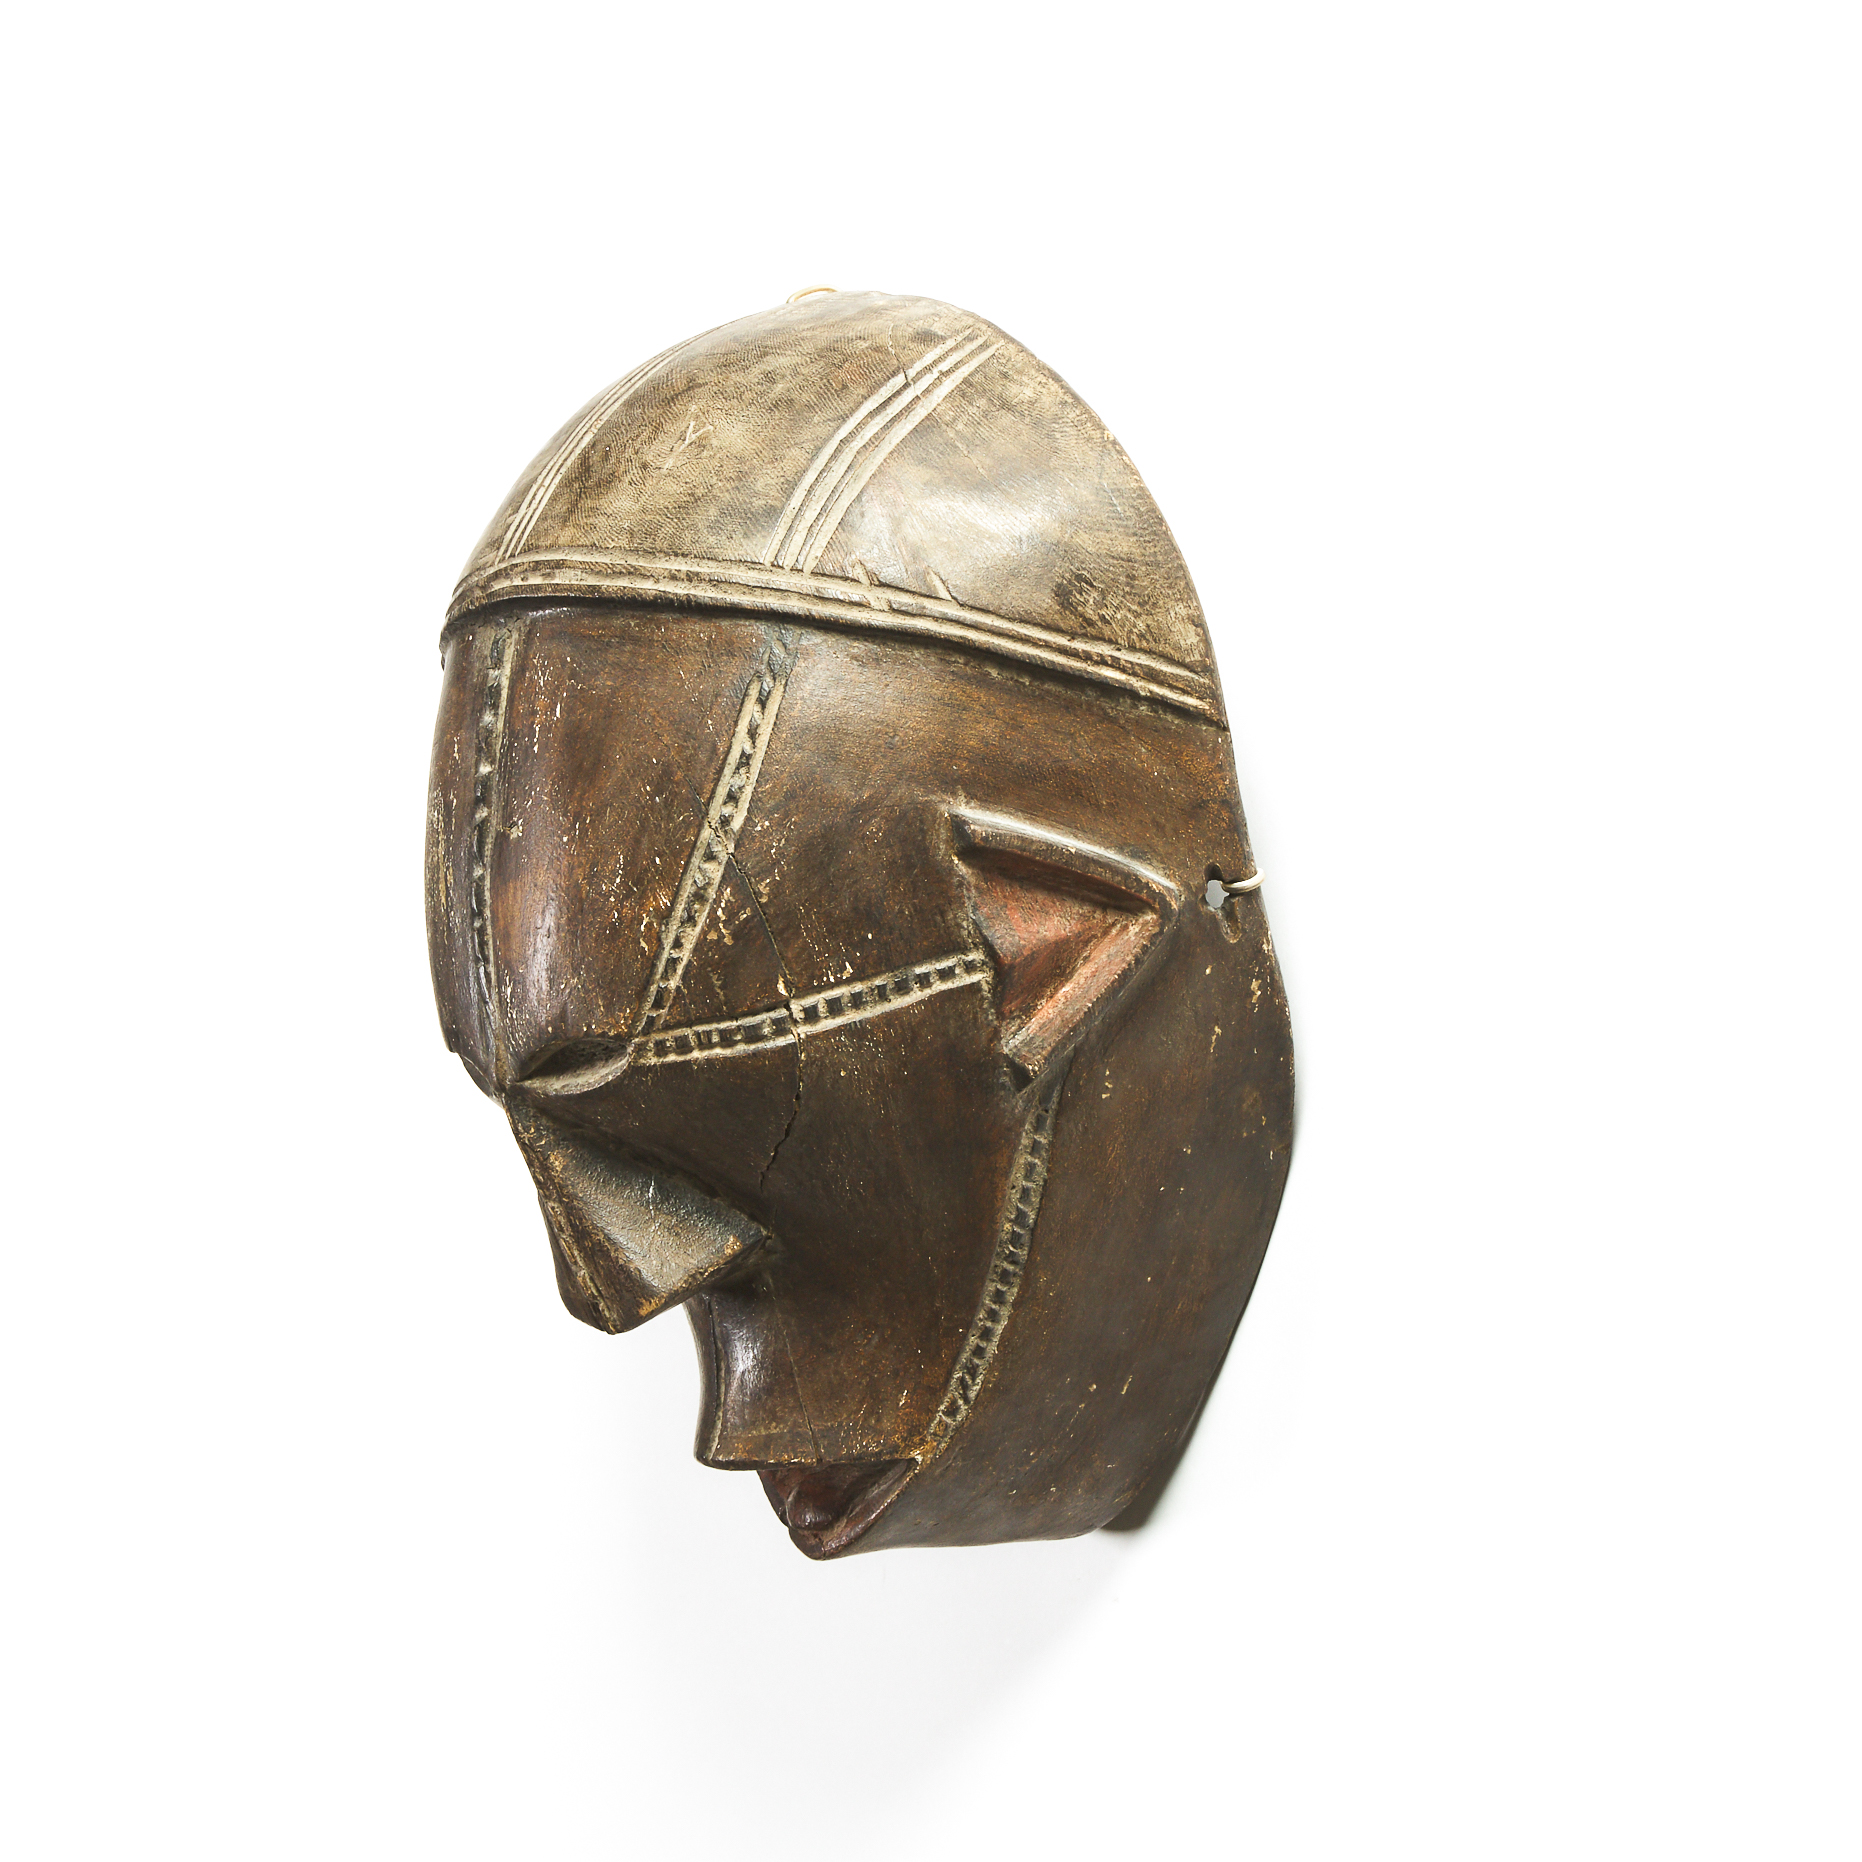 Tabwa Mask, Democratic Republic of Congo, Central Africa, mid to late 20th century